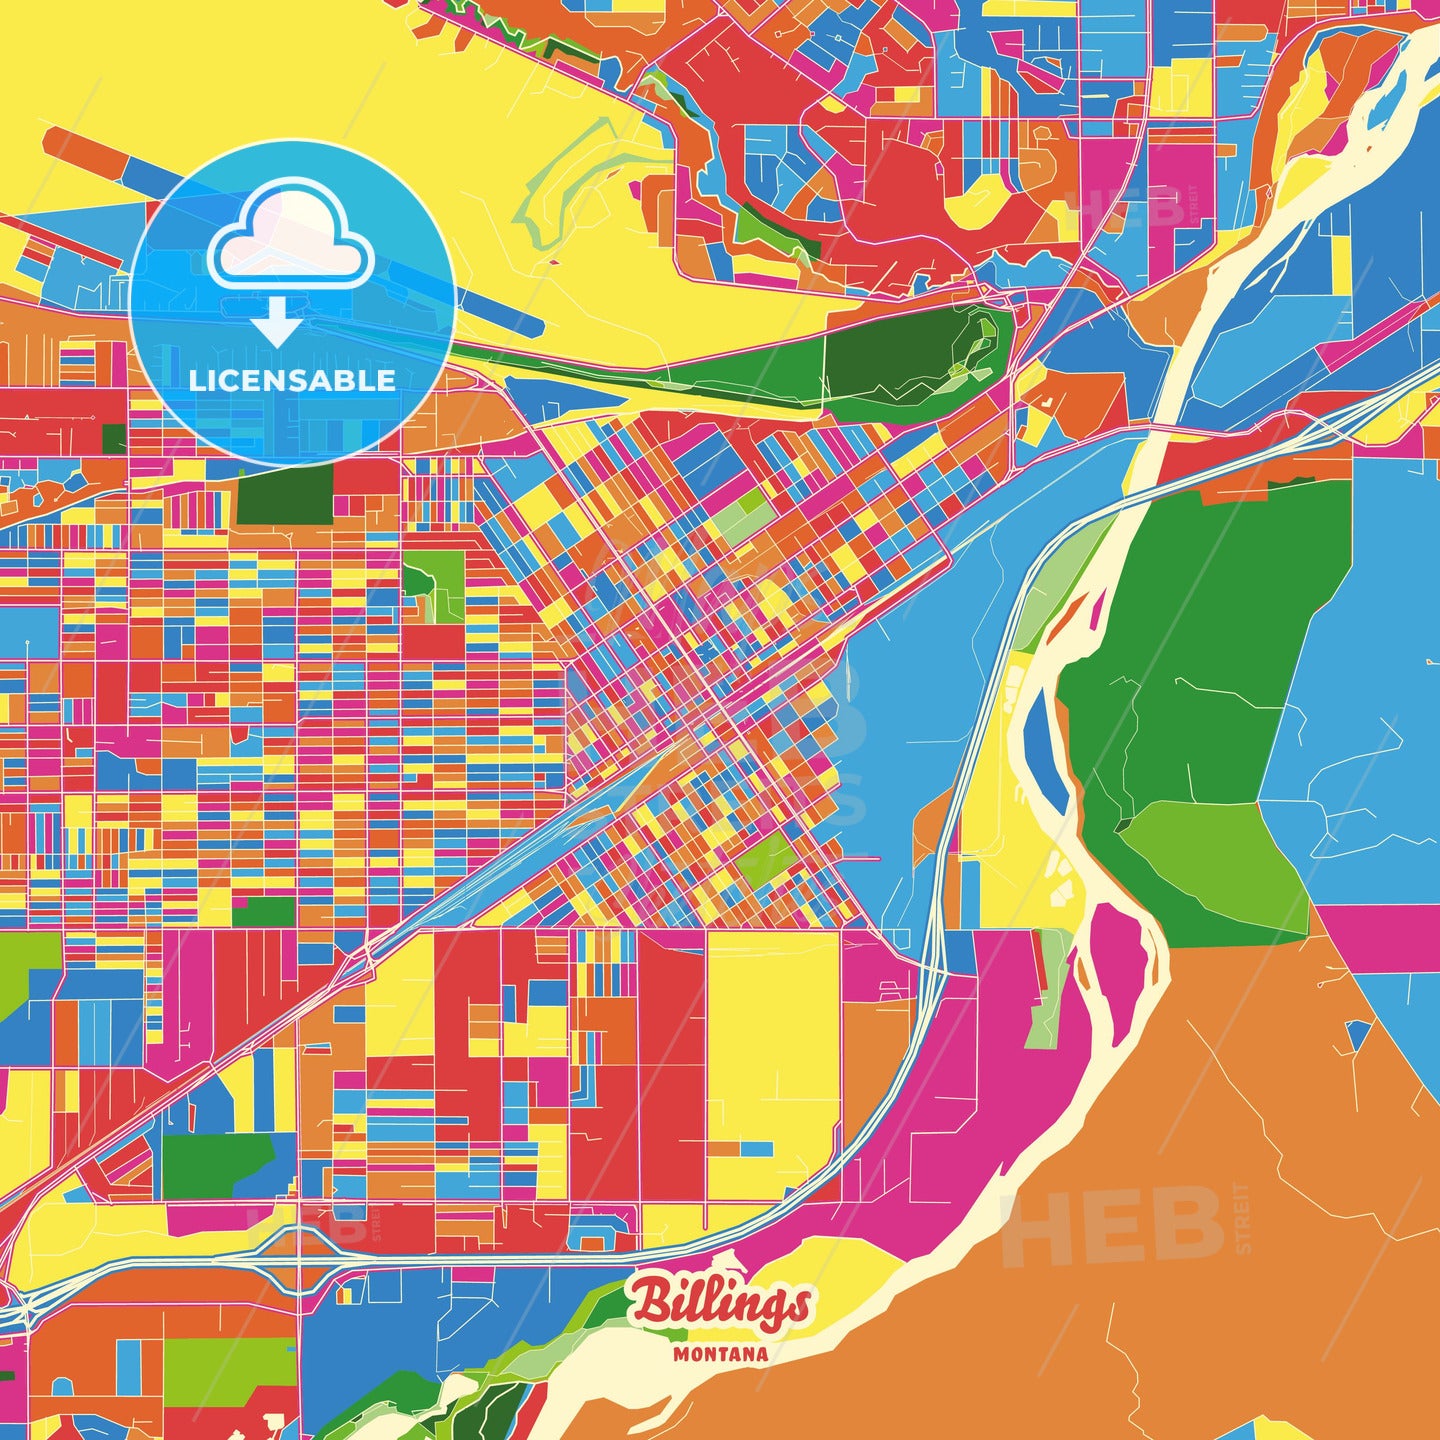 Billings, United States Crazy Colorful Street Map Poster Template - HEBSTREITS Sketches